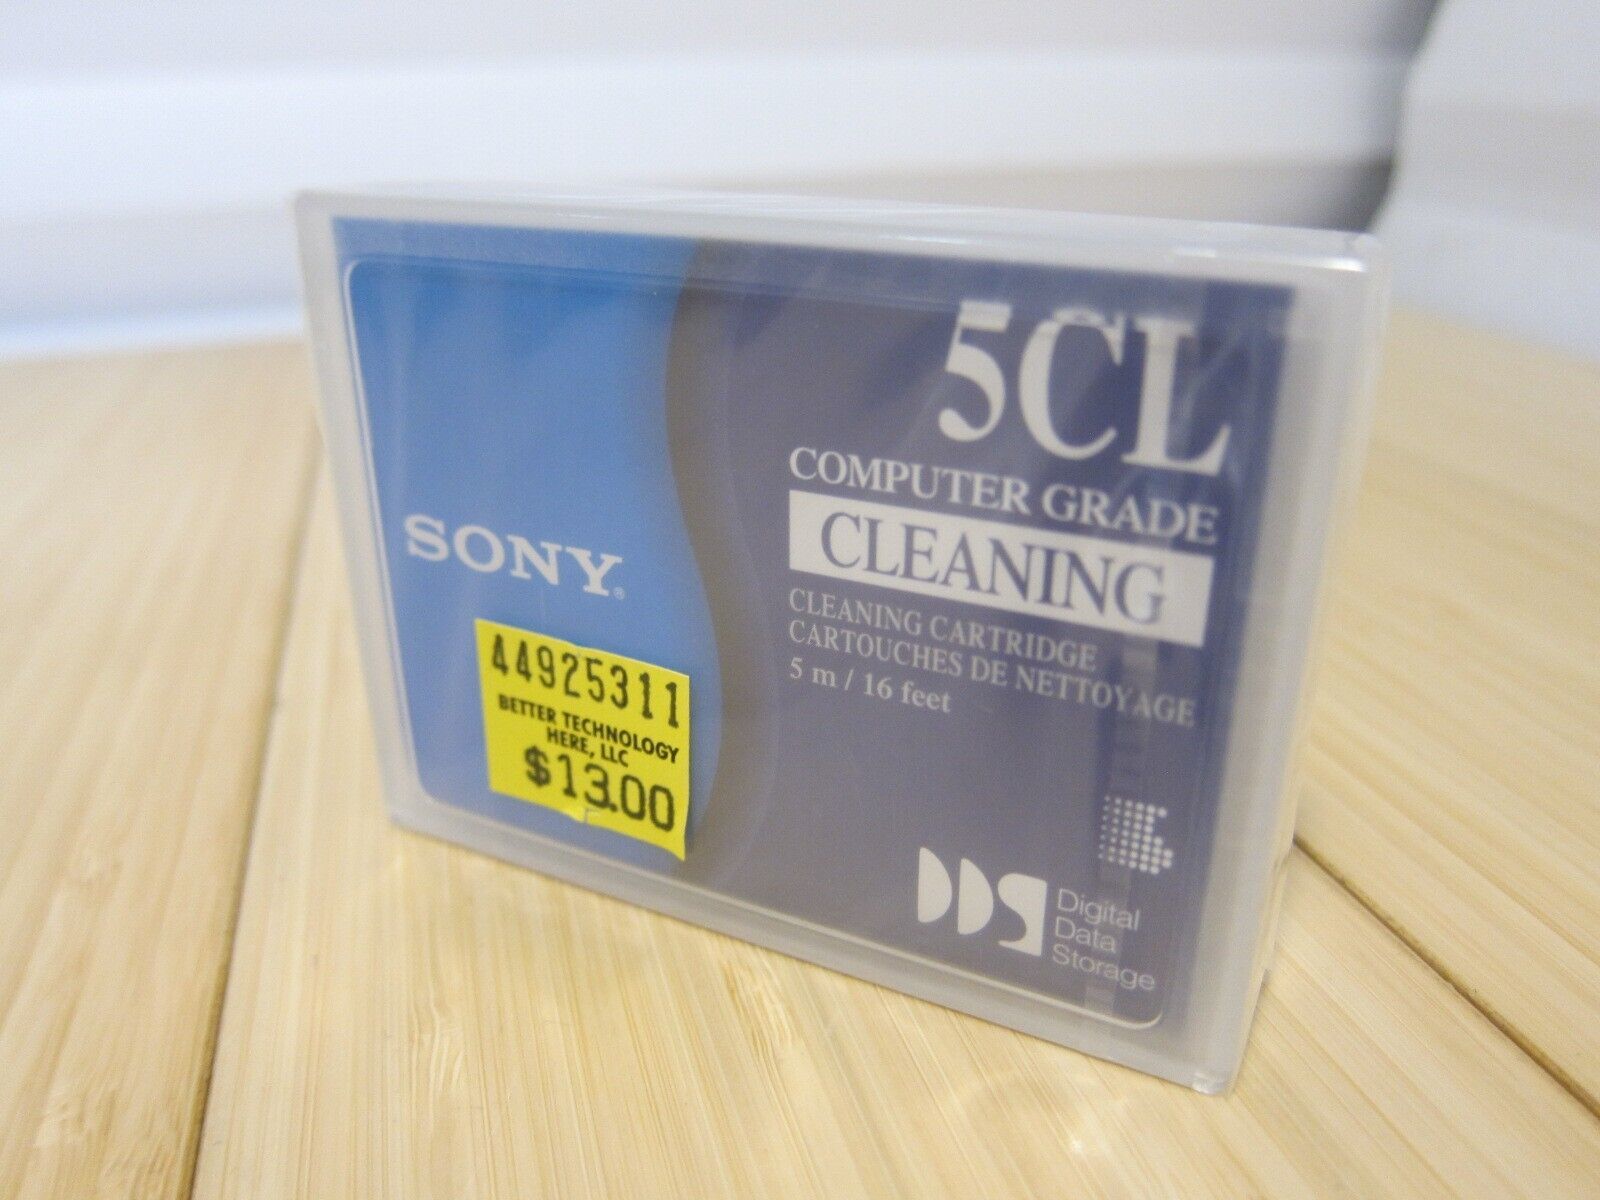 NOS Factory Sealed Sony DG-5CL Computer Grade Cleaning Tape Cartridge - $7.69